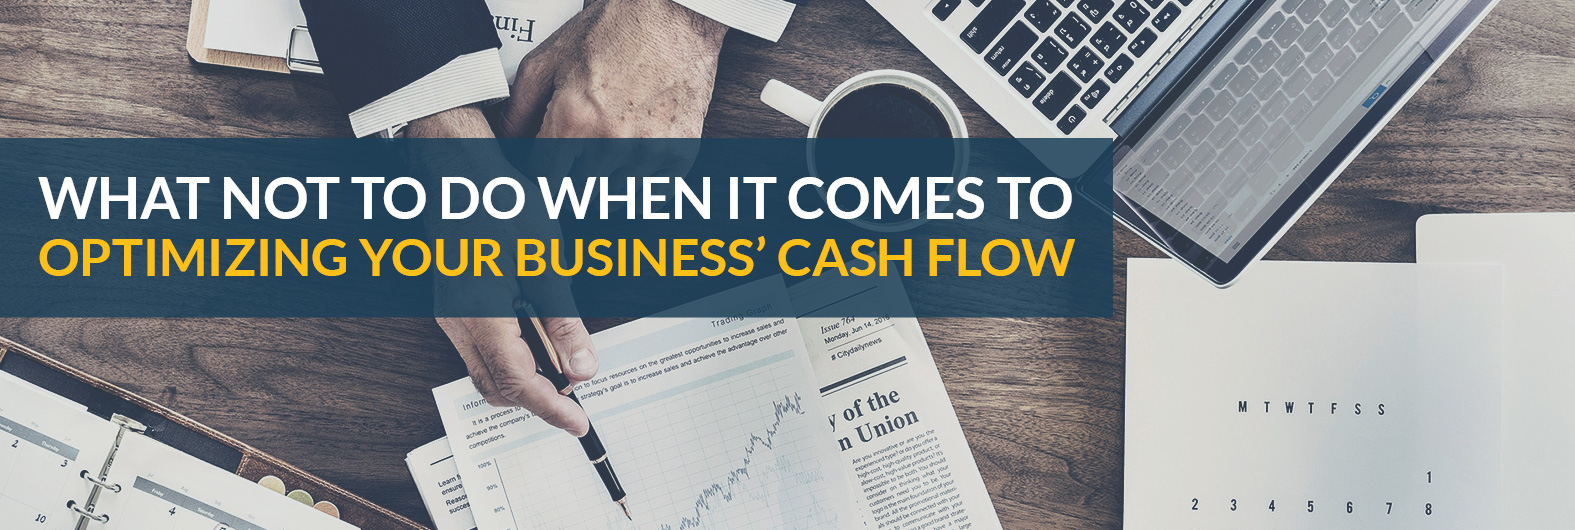 What NOT to do when it comes to optimizing your business’ cash flow